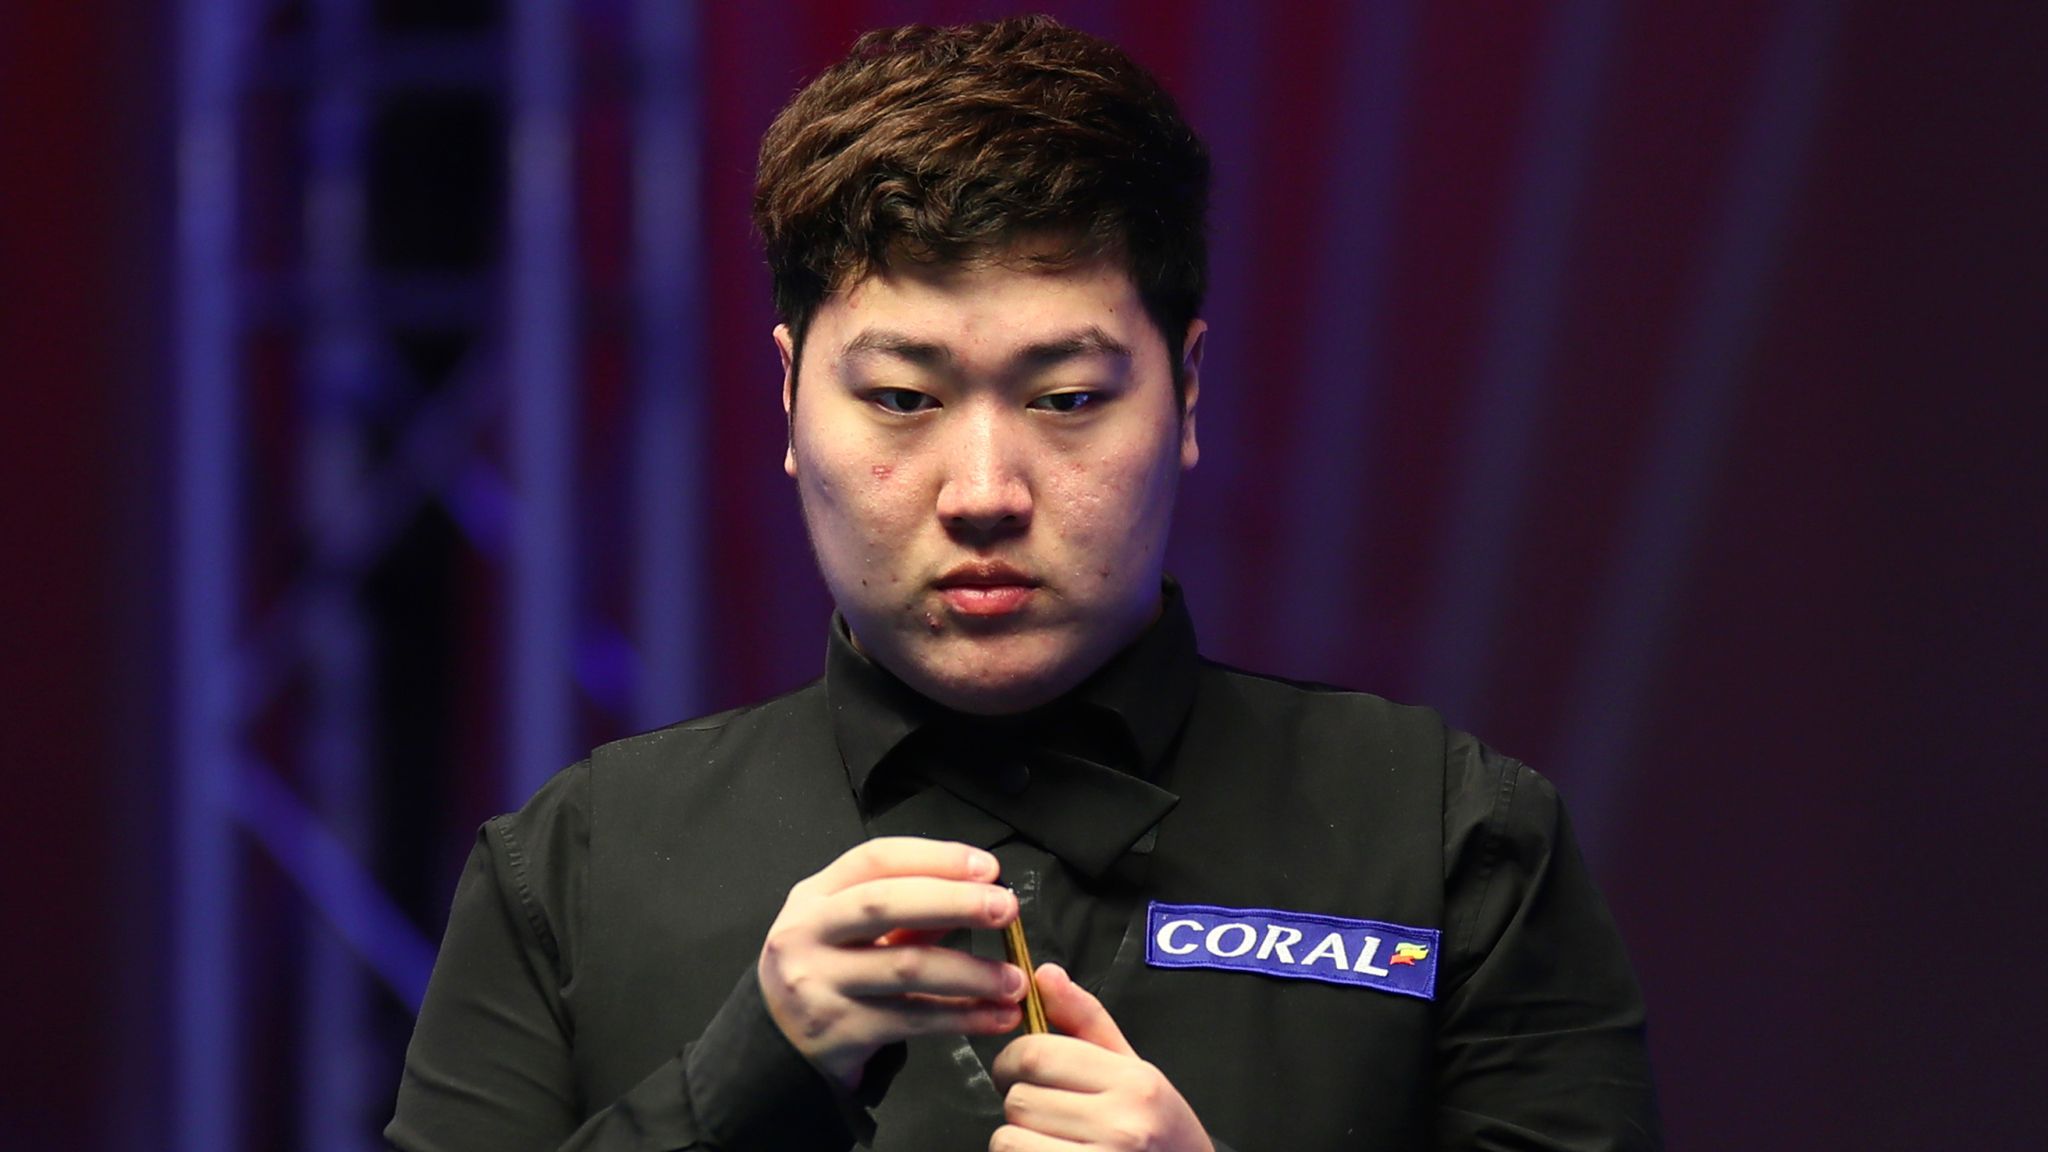 Yan Bingtao Former Masters champion suspended by World Snooker amid match-fixing investigation Snooker News Sky Sports